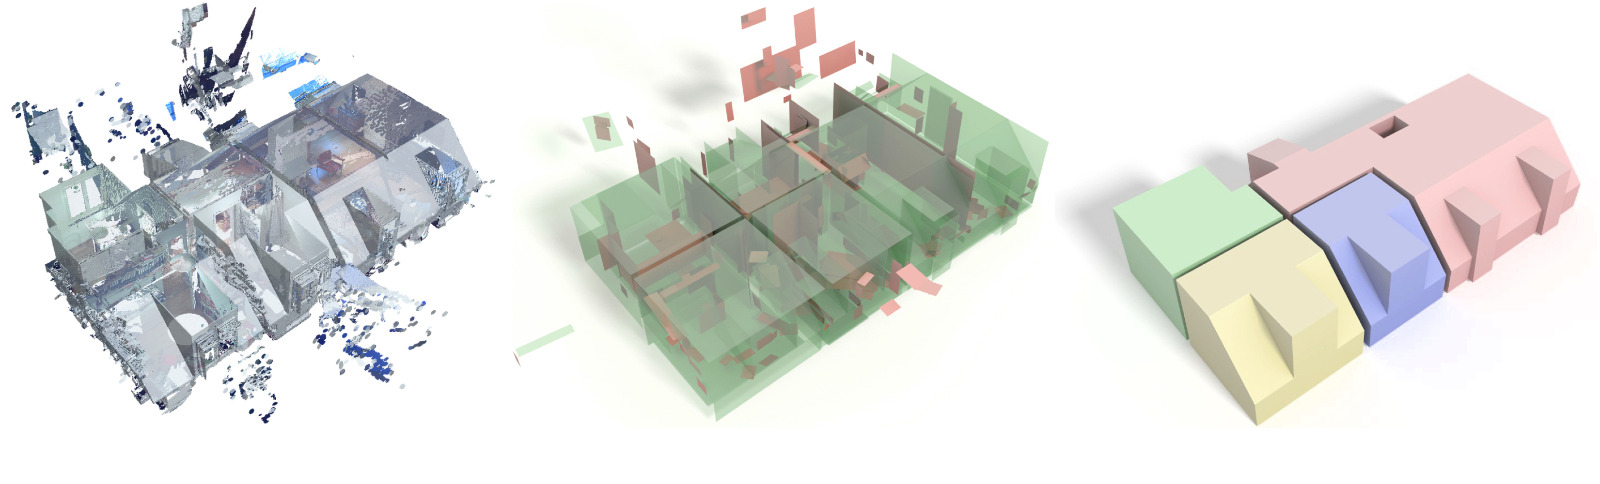 Piecewise-planar Reconstruction of Multi-room Interiors with Arbitrary Wall Arrangements